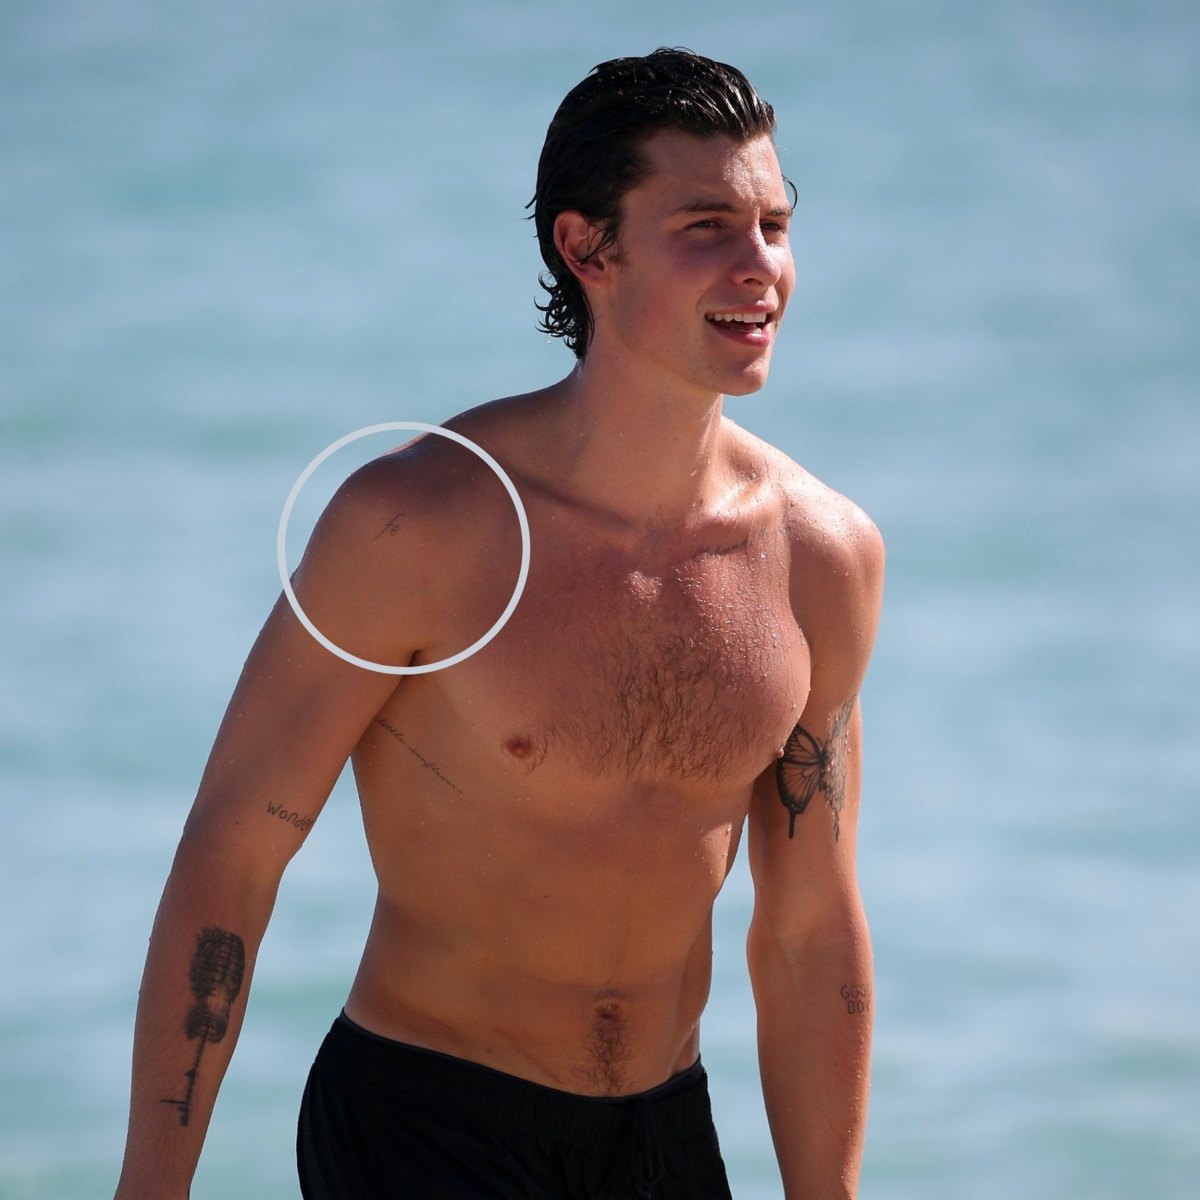 Shawn Mendes Tattoos: Guide to His Ink Designs and Meanings